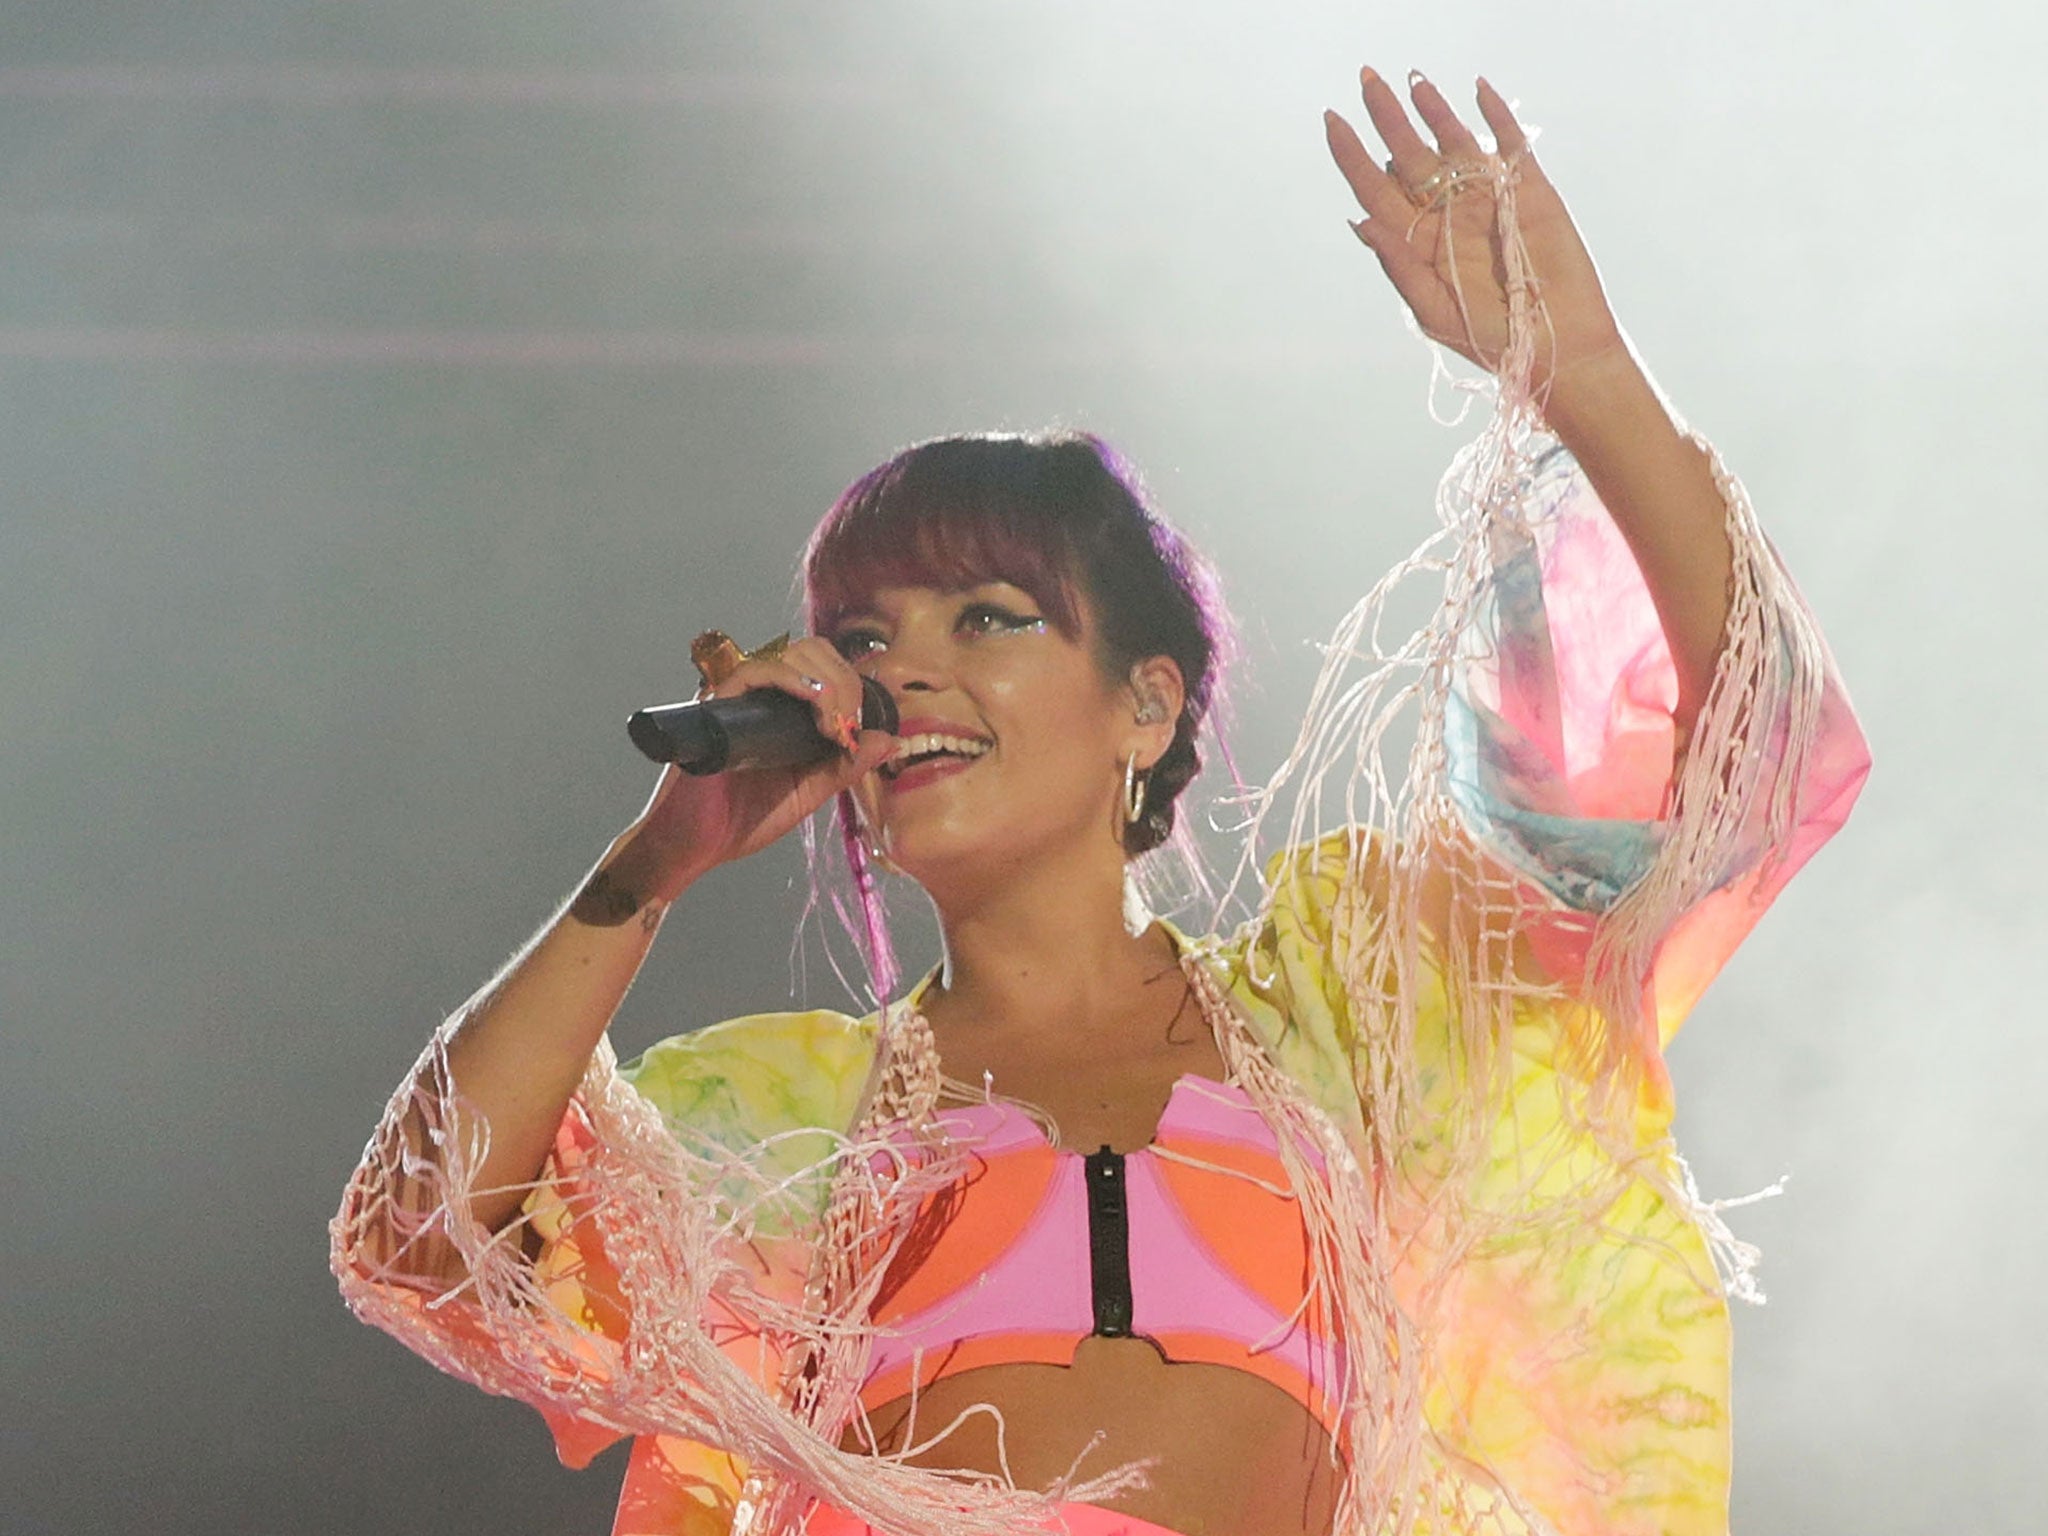 Lily Allen performs on stage at Splendour In the Grass 2014 on 27 July, 2014, in Byron Bay, Australia